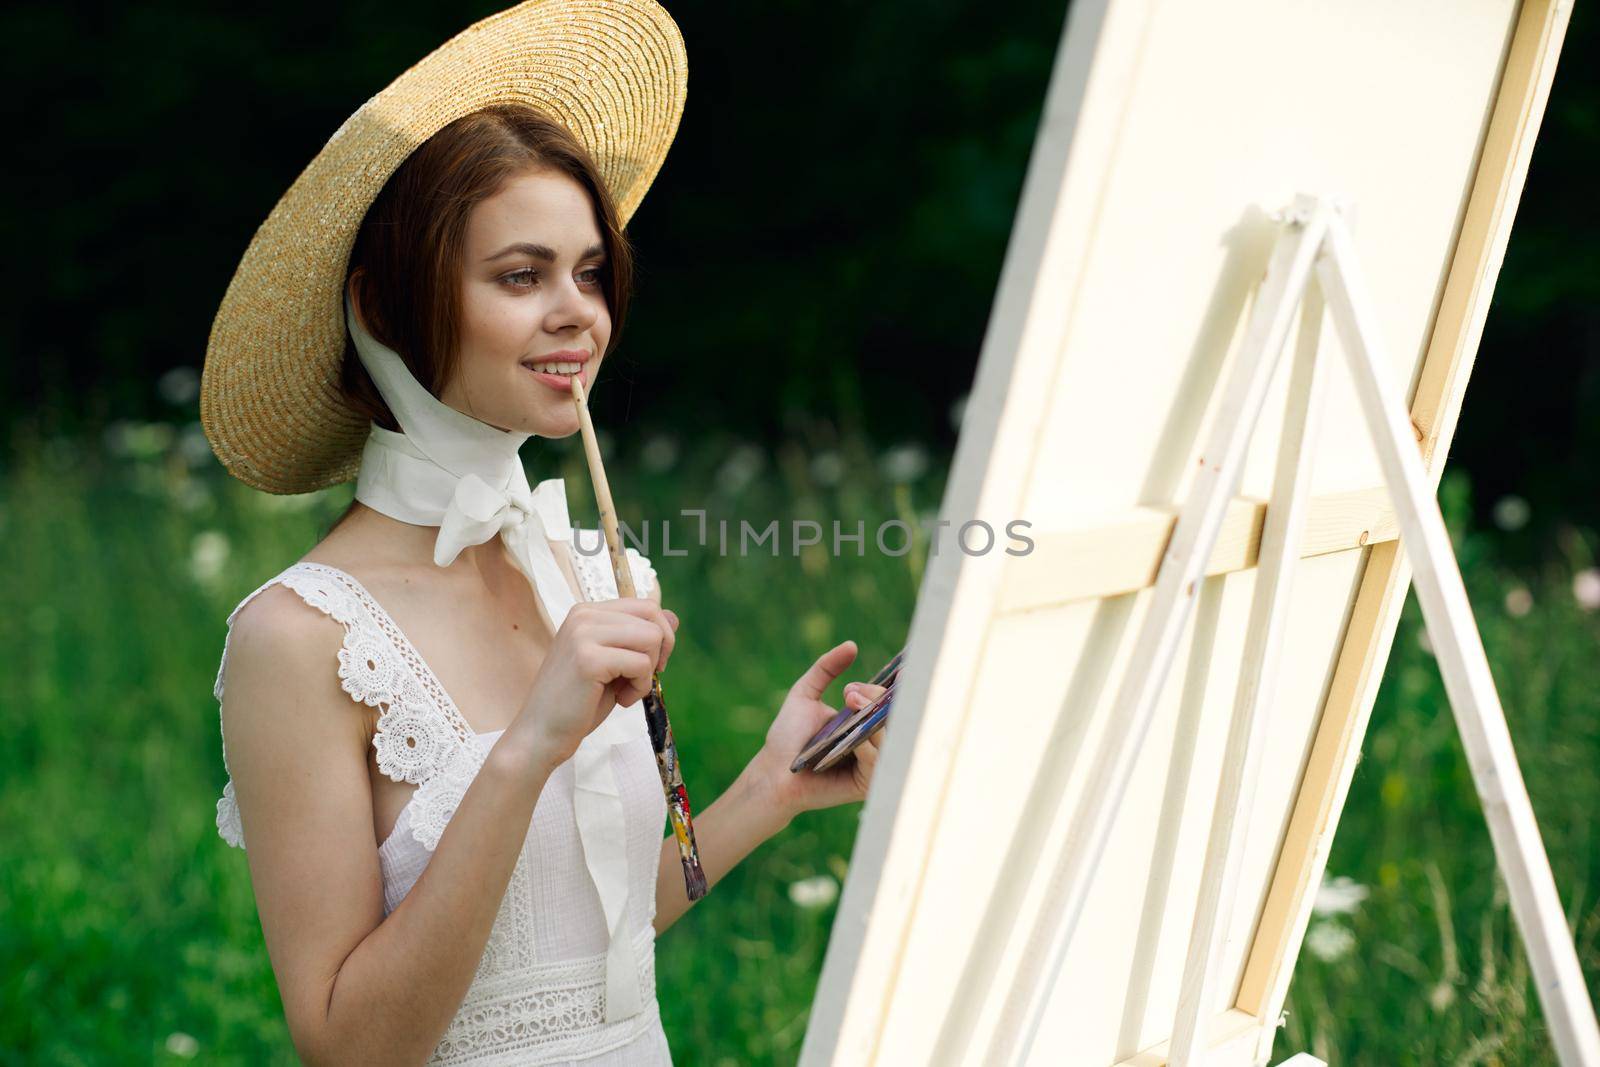 Woman in white dress artist easel painting nature landscape. High quality photo